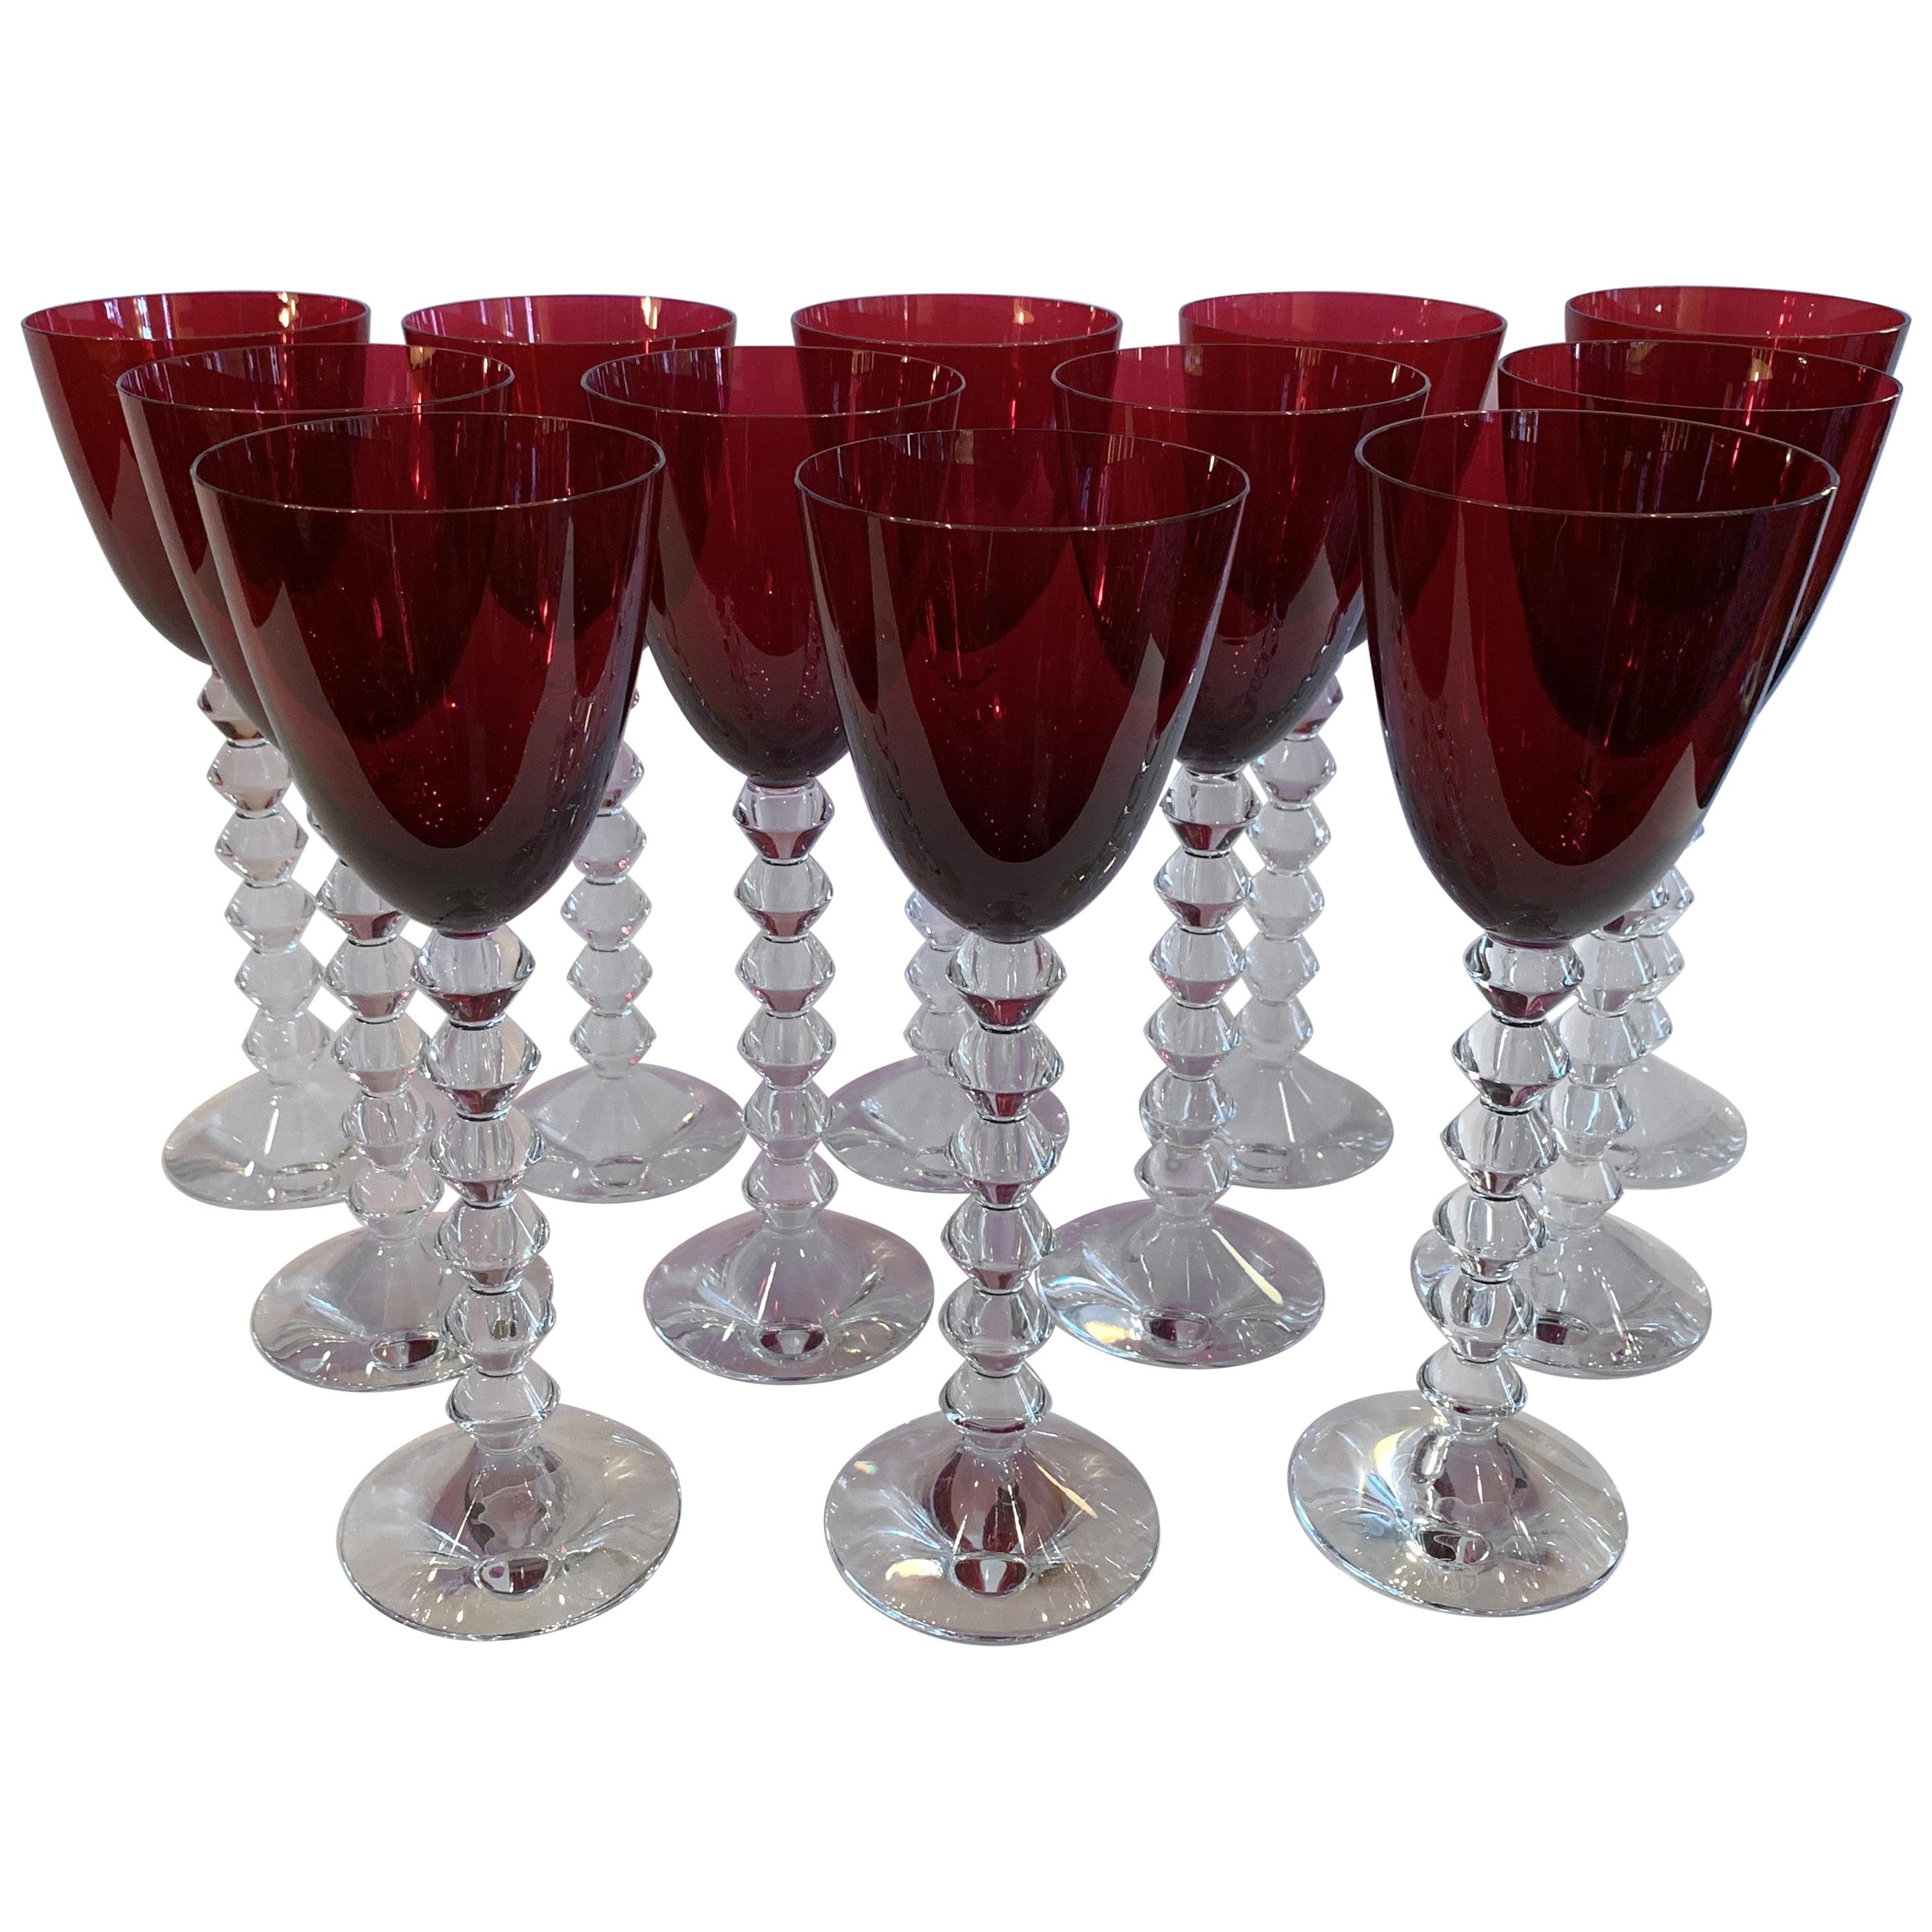 French Service Set of 12 Baccarat VÉGA Wine Ruby Red Rhine Glass Crystal